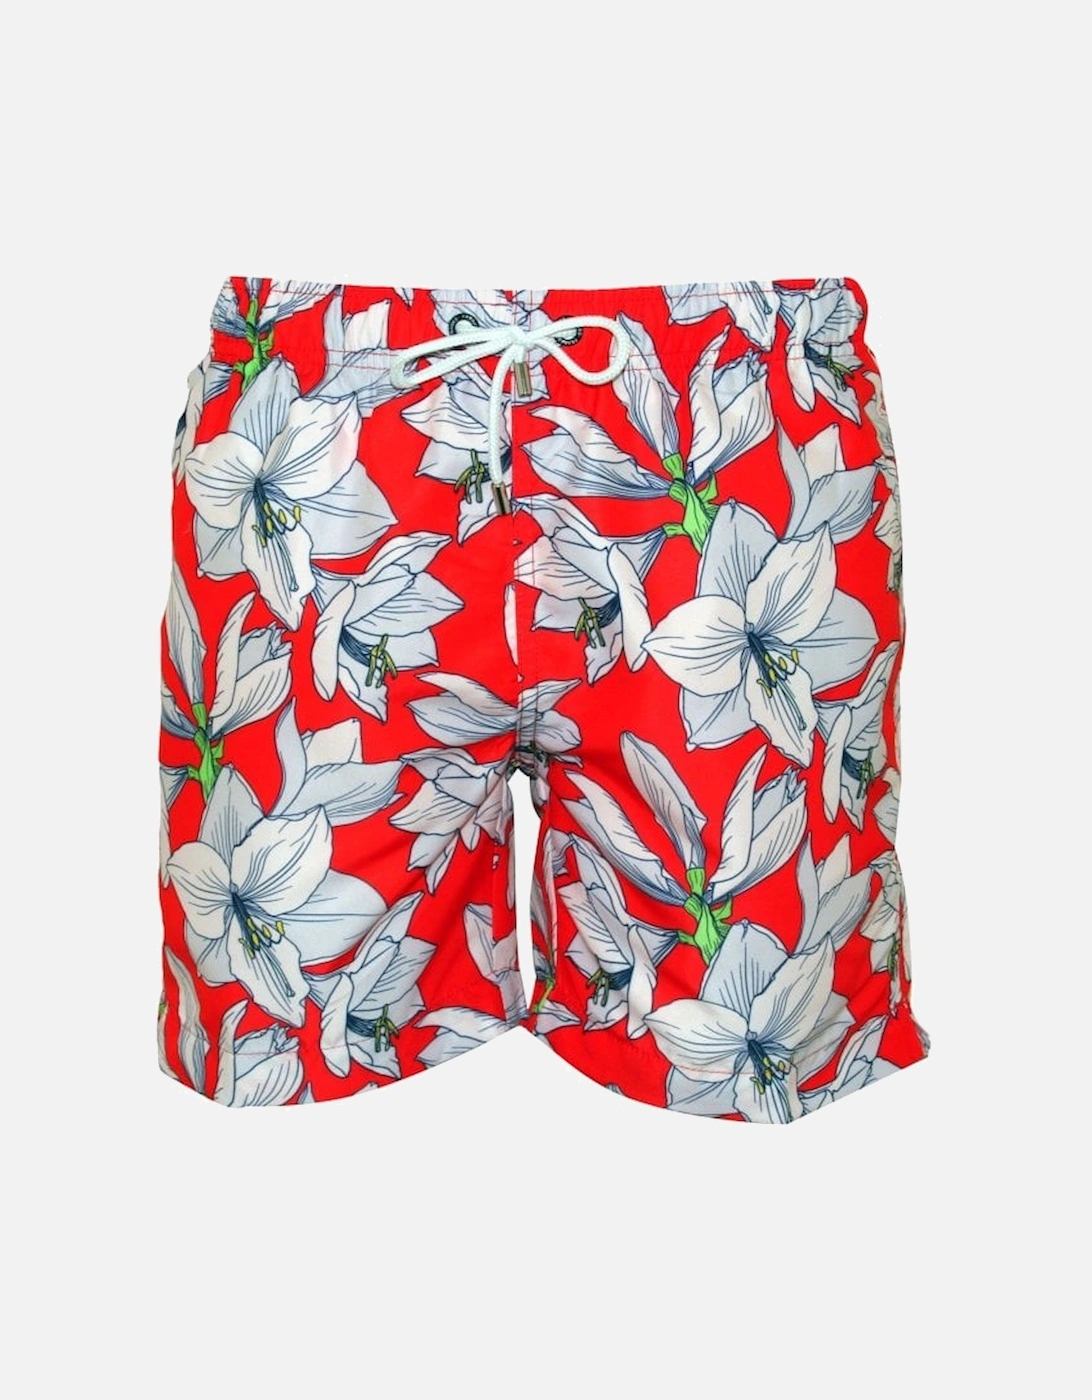 Coolum Fire Floral Print Swim Shorts, Red, 8 of 7